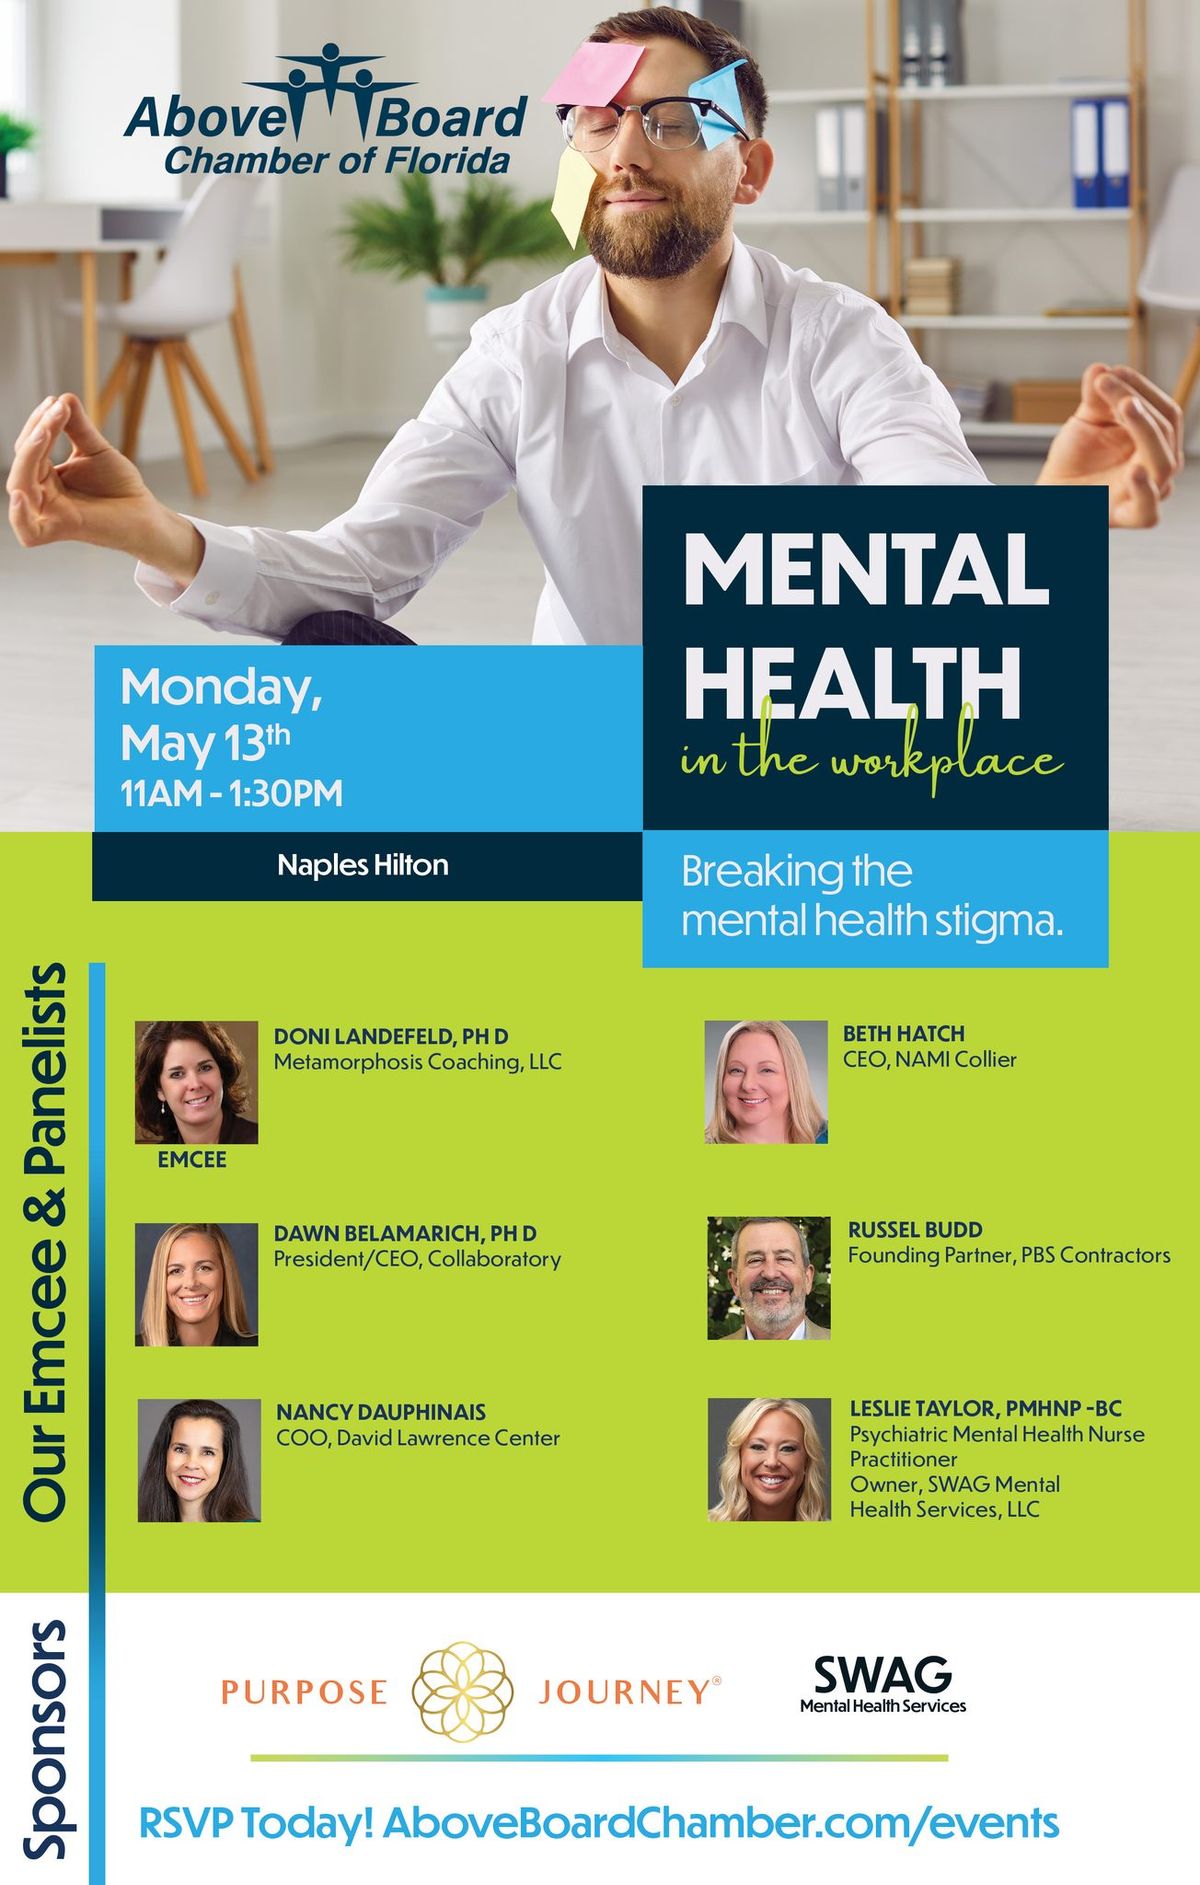 Naples: Mental Health in the Workplace with the Above Board Chamber Monday, May 13th Hilton Naples!